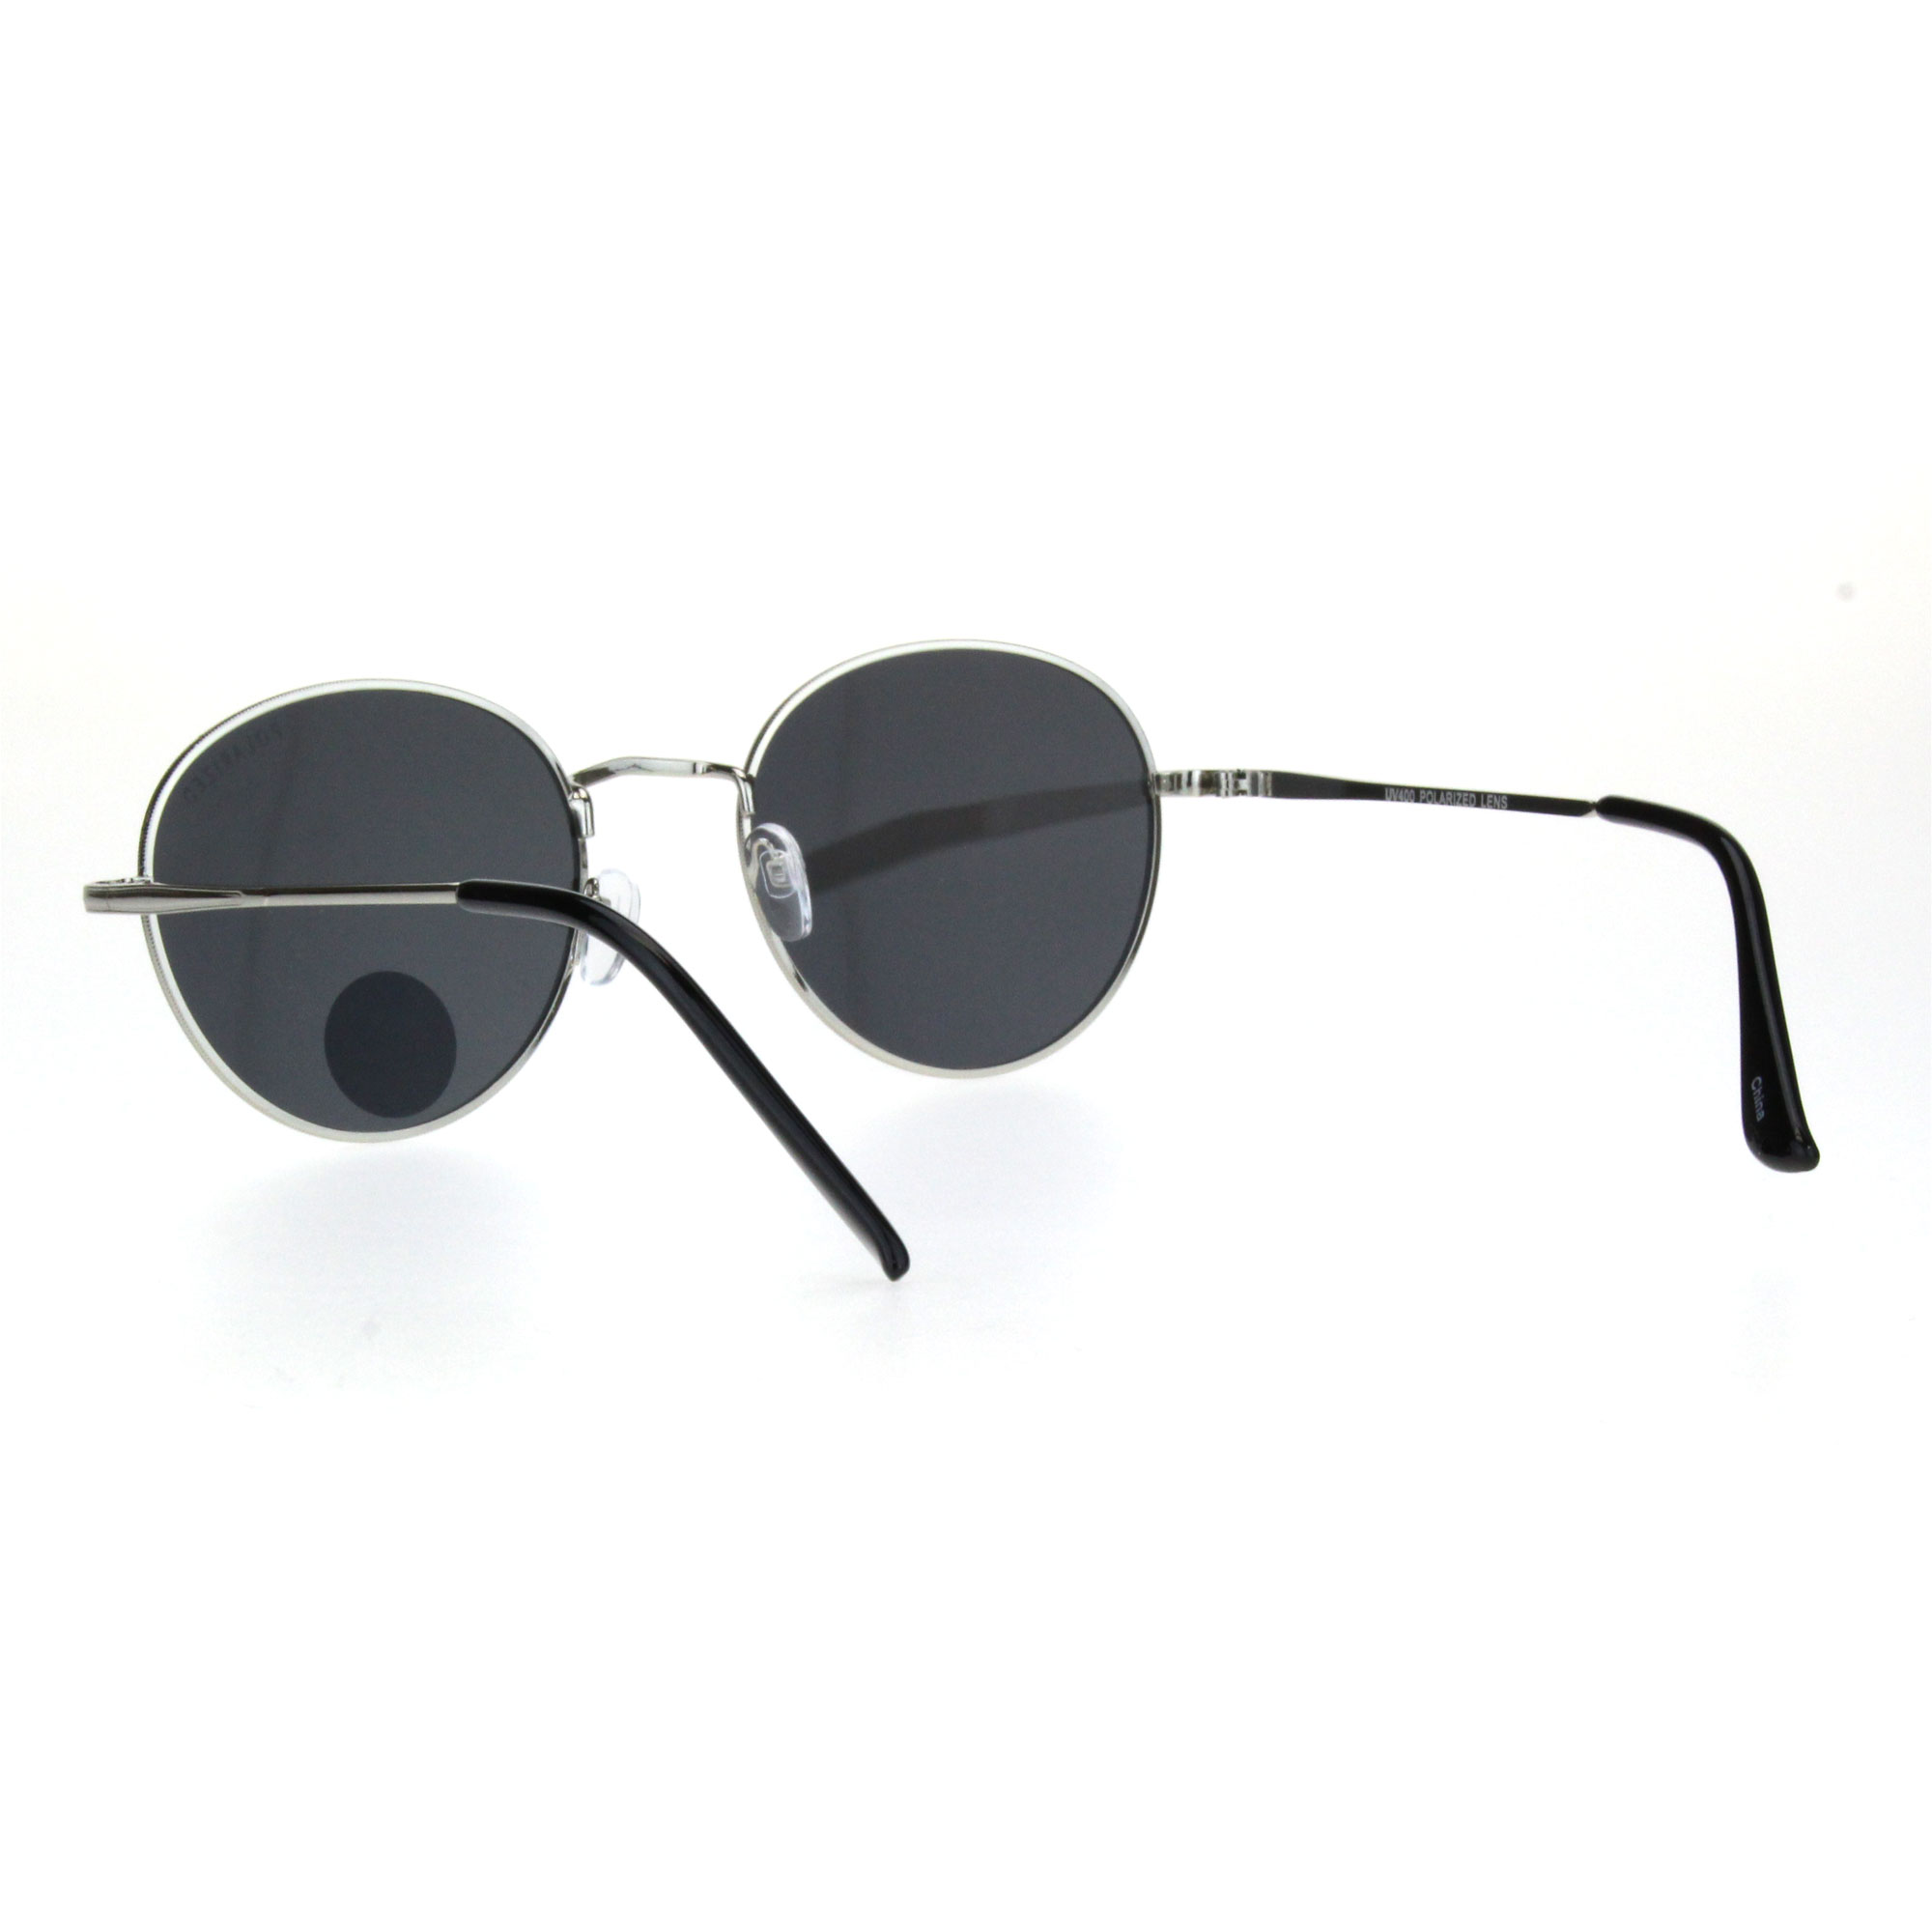 Polarized Lens Mens Trendy Hipster Dad Shade Round Oval Sunglasses Silver Black - image 4 of 4